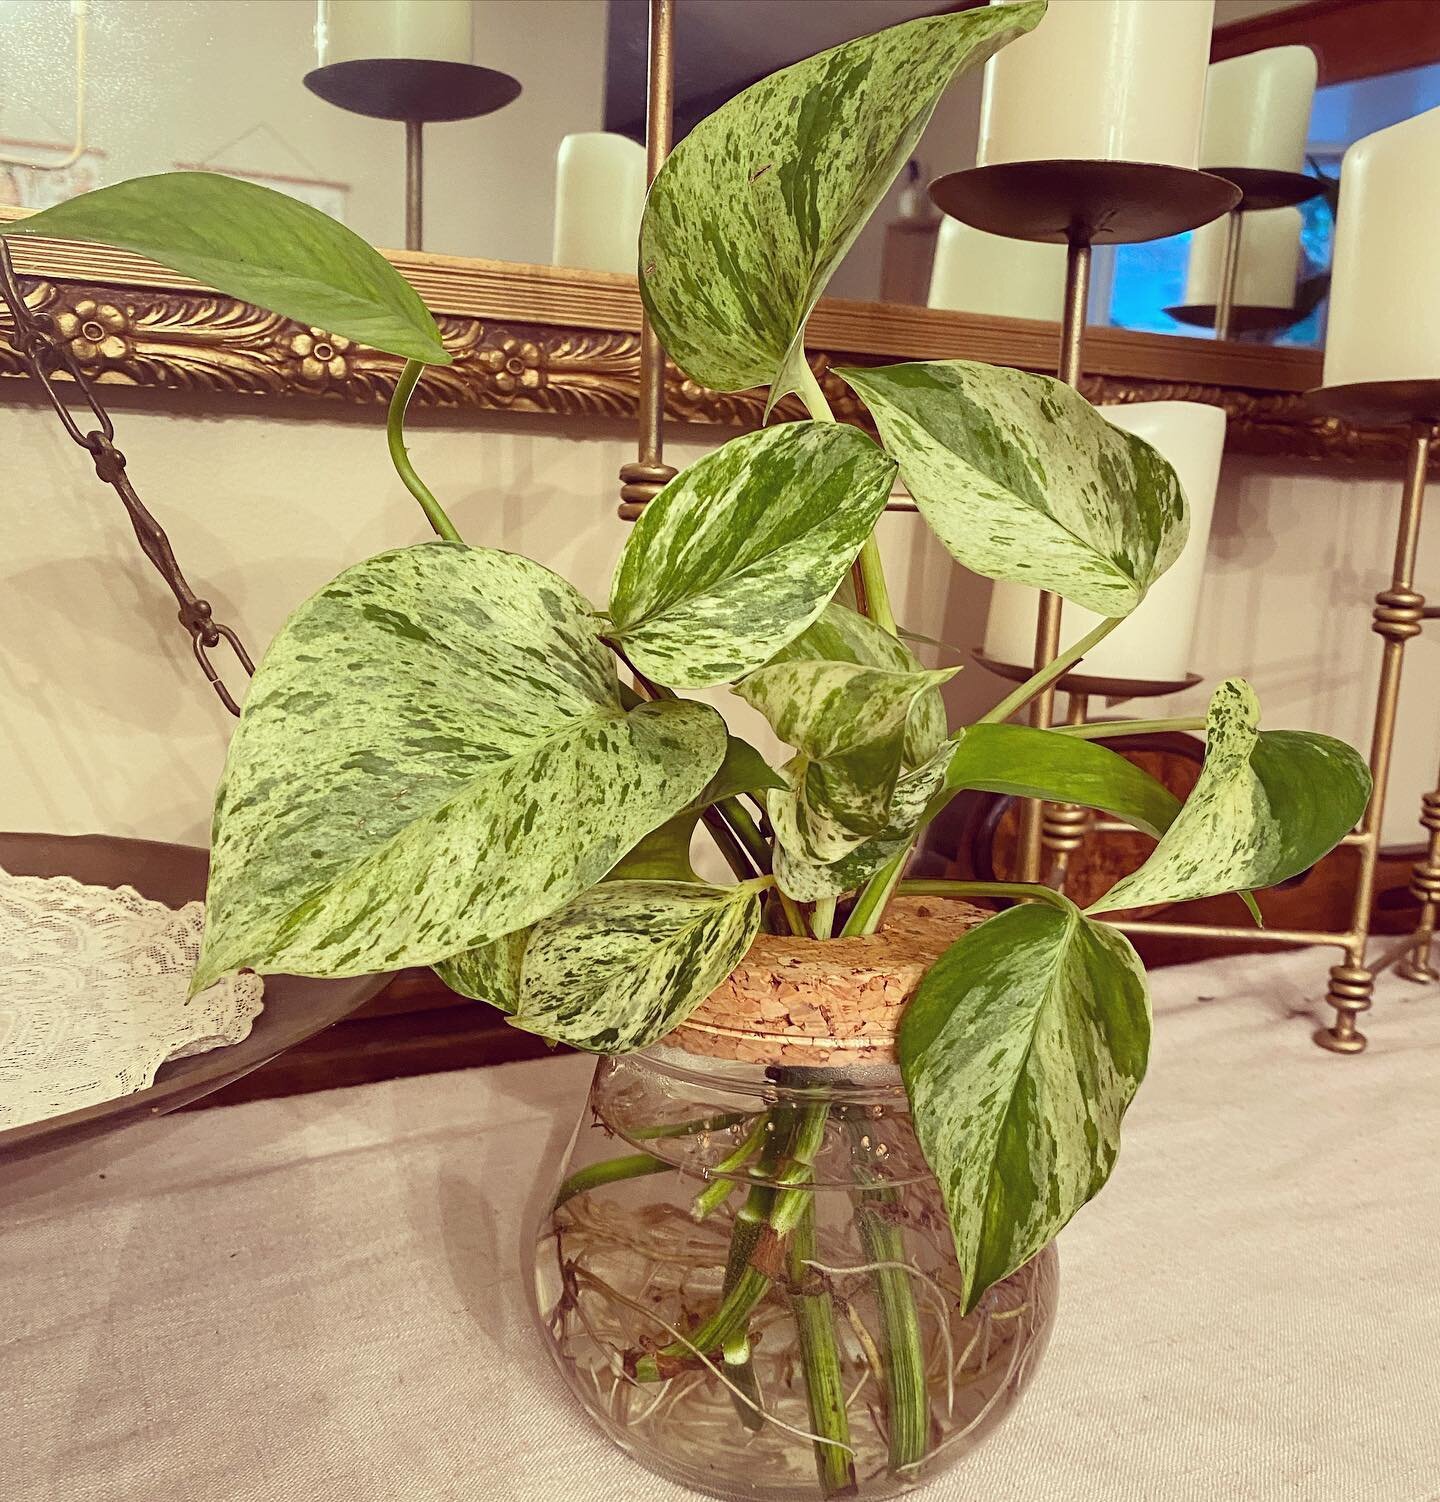 Sold✨ 

A happy rooted pothos in glass jar - $20

🌱 This pothos will thrive in water as you watch the roots grow (as long as you refresh the water weekly). Or you can pot it with soil and use this jar for propagation! 

🌱 pickup @theshopon7 
🌱 ven